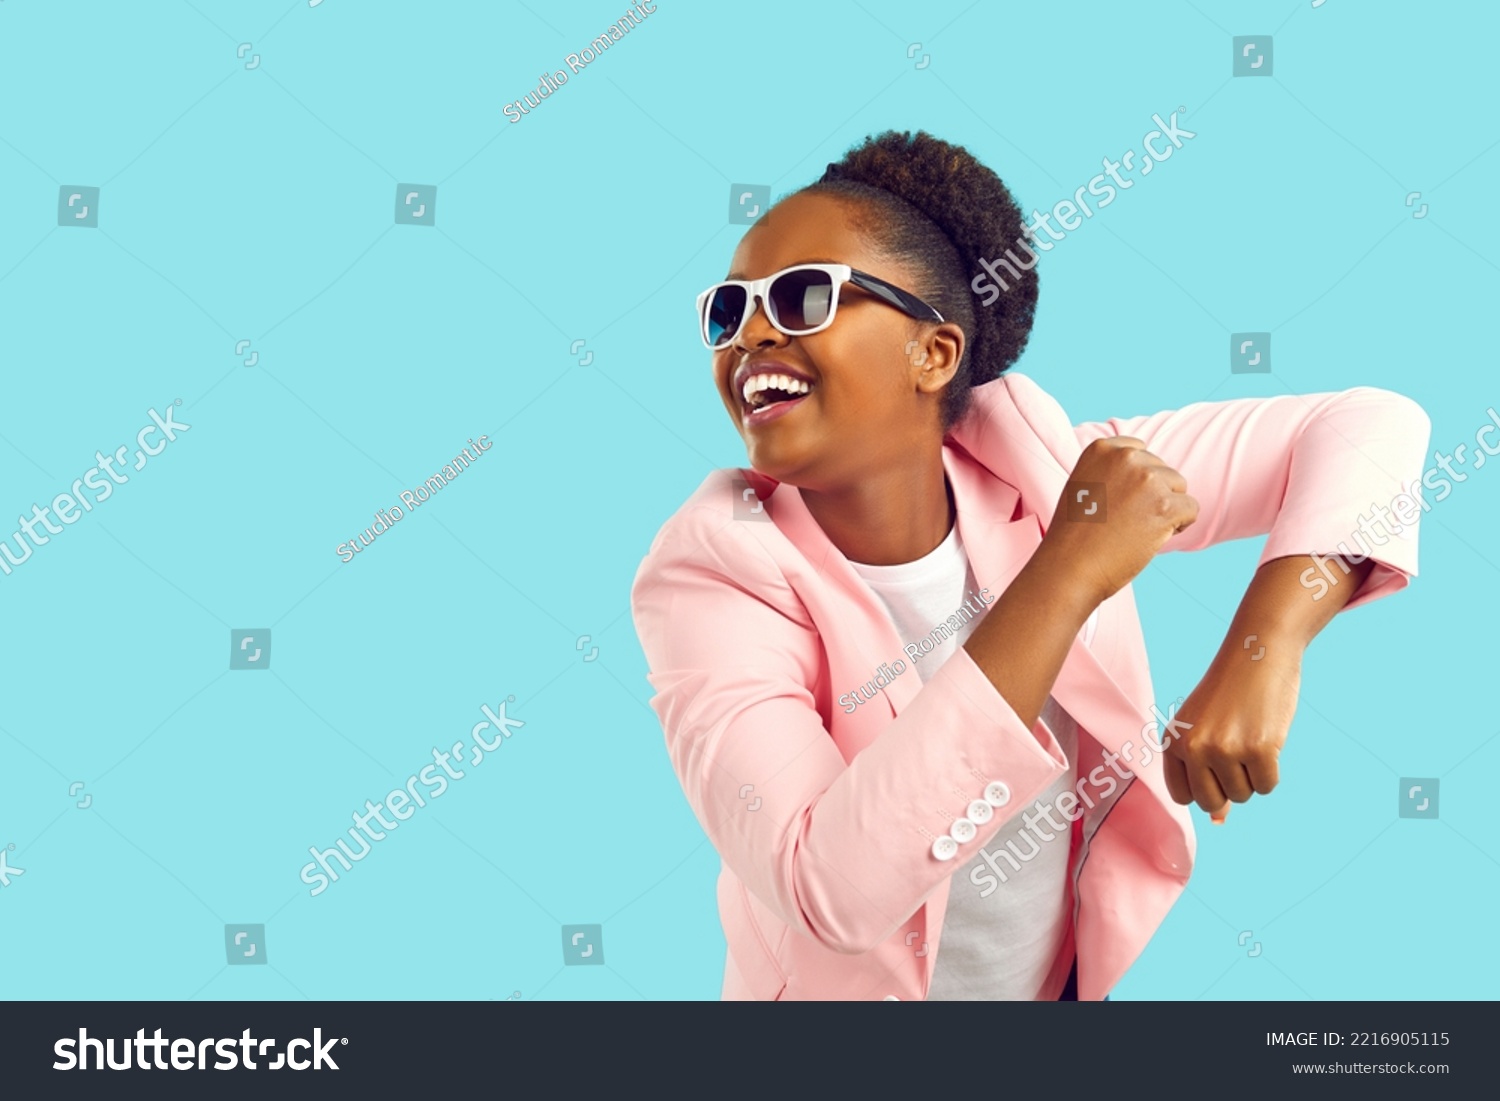 Cheerful happy excited young African American girl in pink suit and sunglasses dancing and having fun. Portrait of funny woman dressed up for party dancing isolated on bright blue copyspace background #2216905115